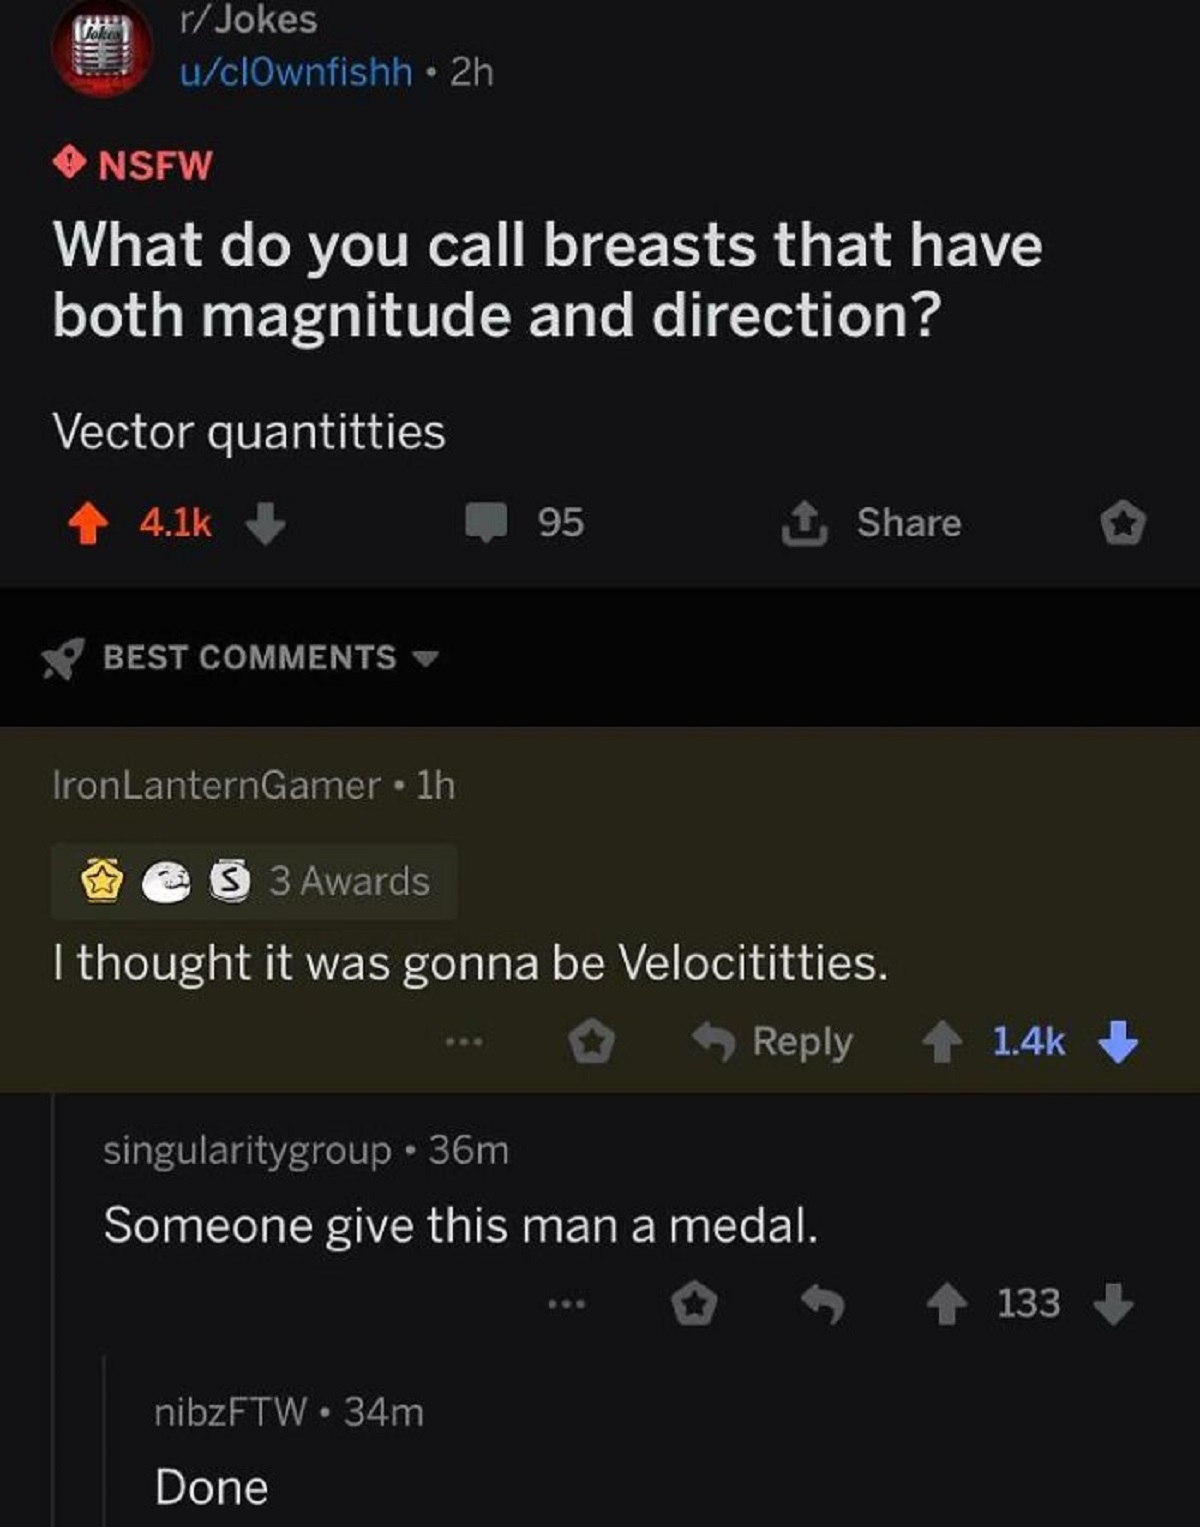 funny replies better than the original - screenshot - rJokes uclownfishh 2h Nsfw What do you call breasts that have both magnitude and direction? Vector quantitties Best 95 Iron LanternGamer . 1h S3 Awards I thought it was gonna be Velocititties. nibzFTW 